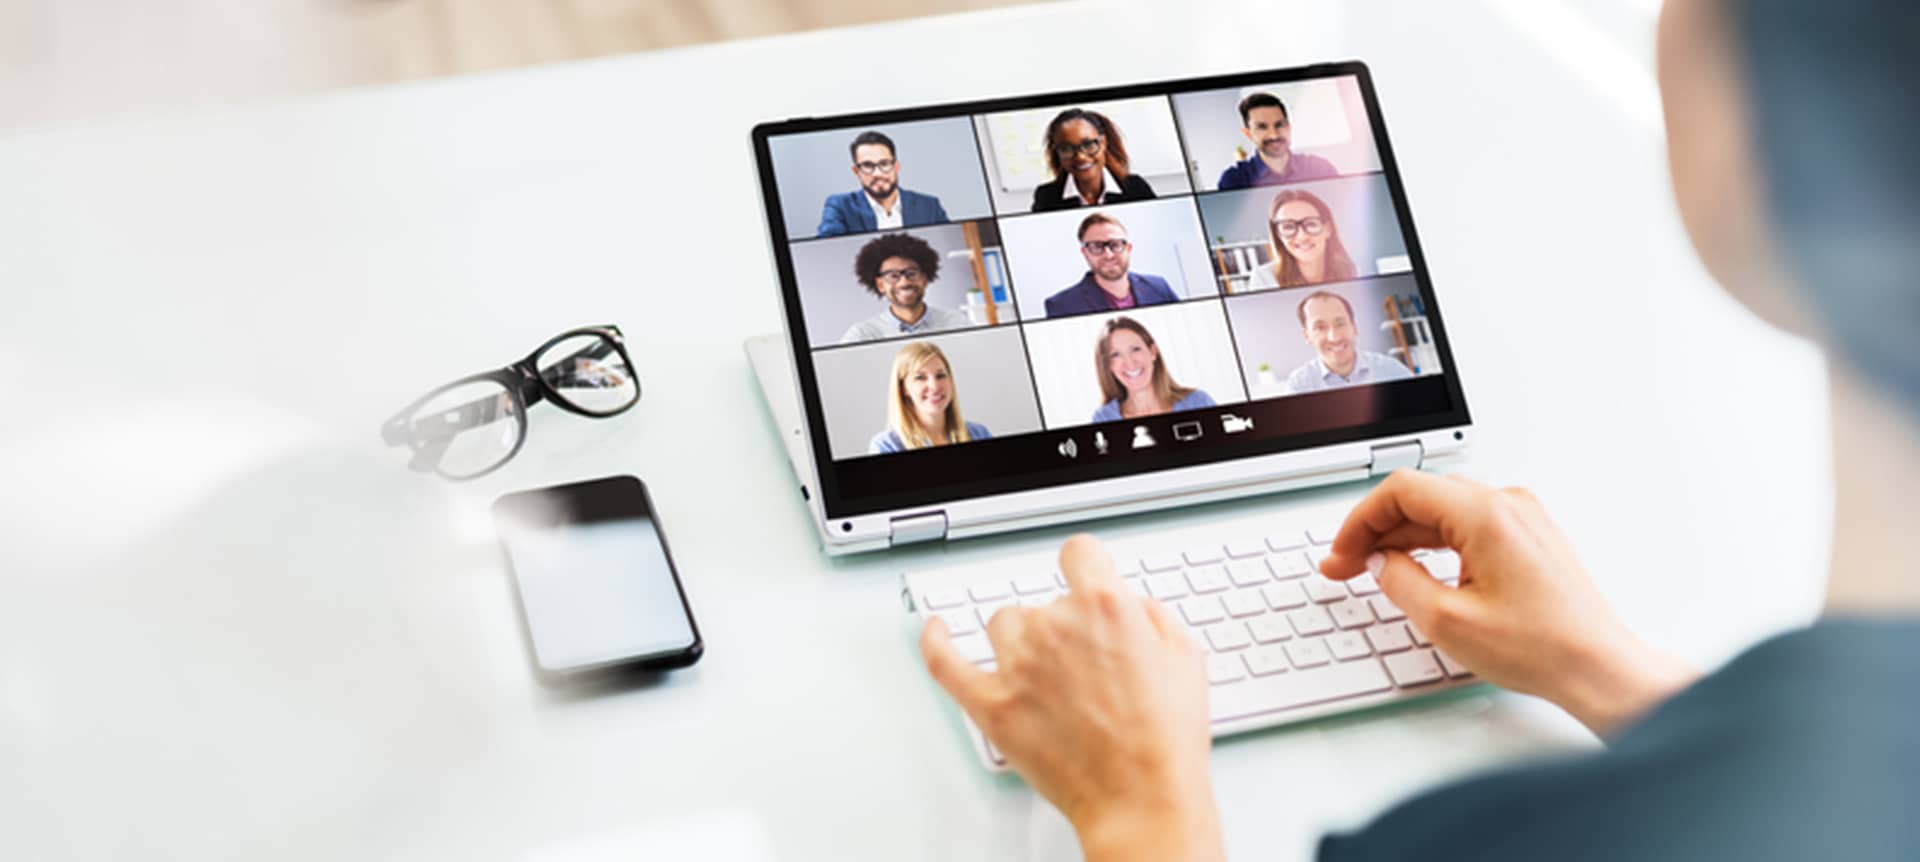 A recruiter using video interviewing software to assess candidates